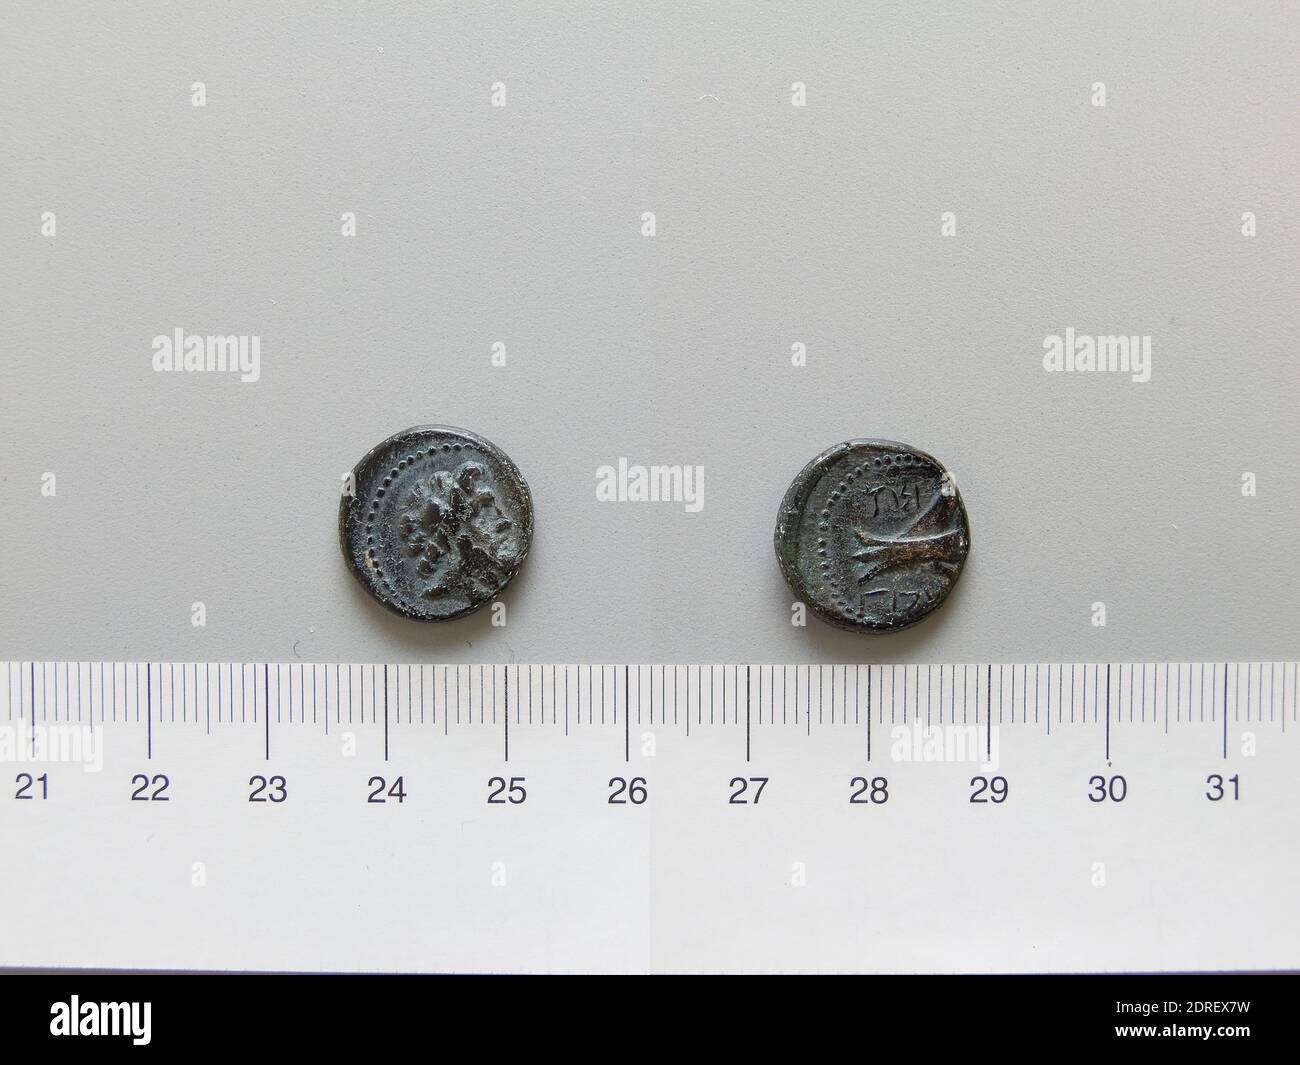 Mint: Aradus, Coin from Aradus, 2nd century B.C., Copper, 3.69 g, 12:00, 16 mm, Made in Aradus, Phoenicia, Greek, 2nd century B.C., Numismatics, Numismatics Stock Photo